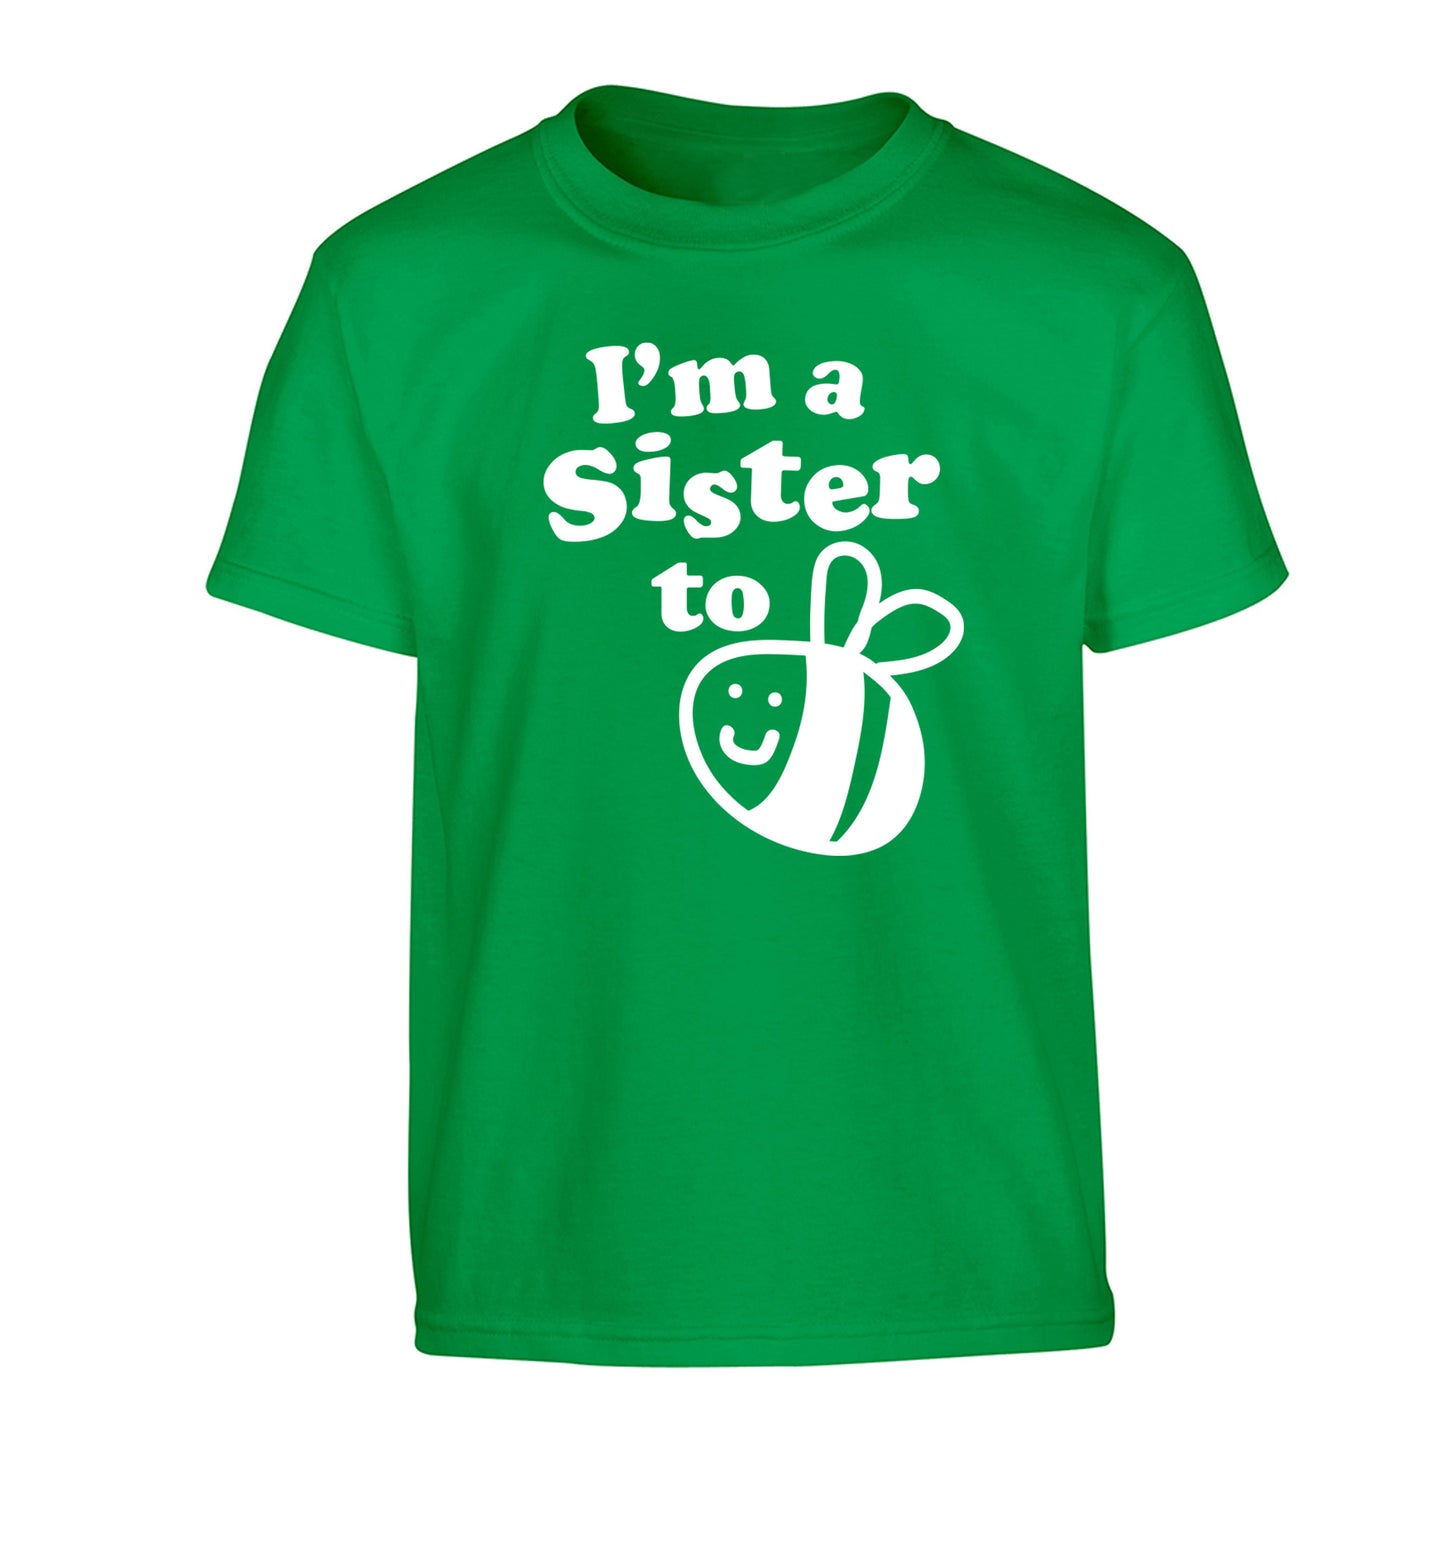 I'm a sister to be Children's green Tshirt 12-14 Years